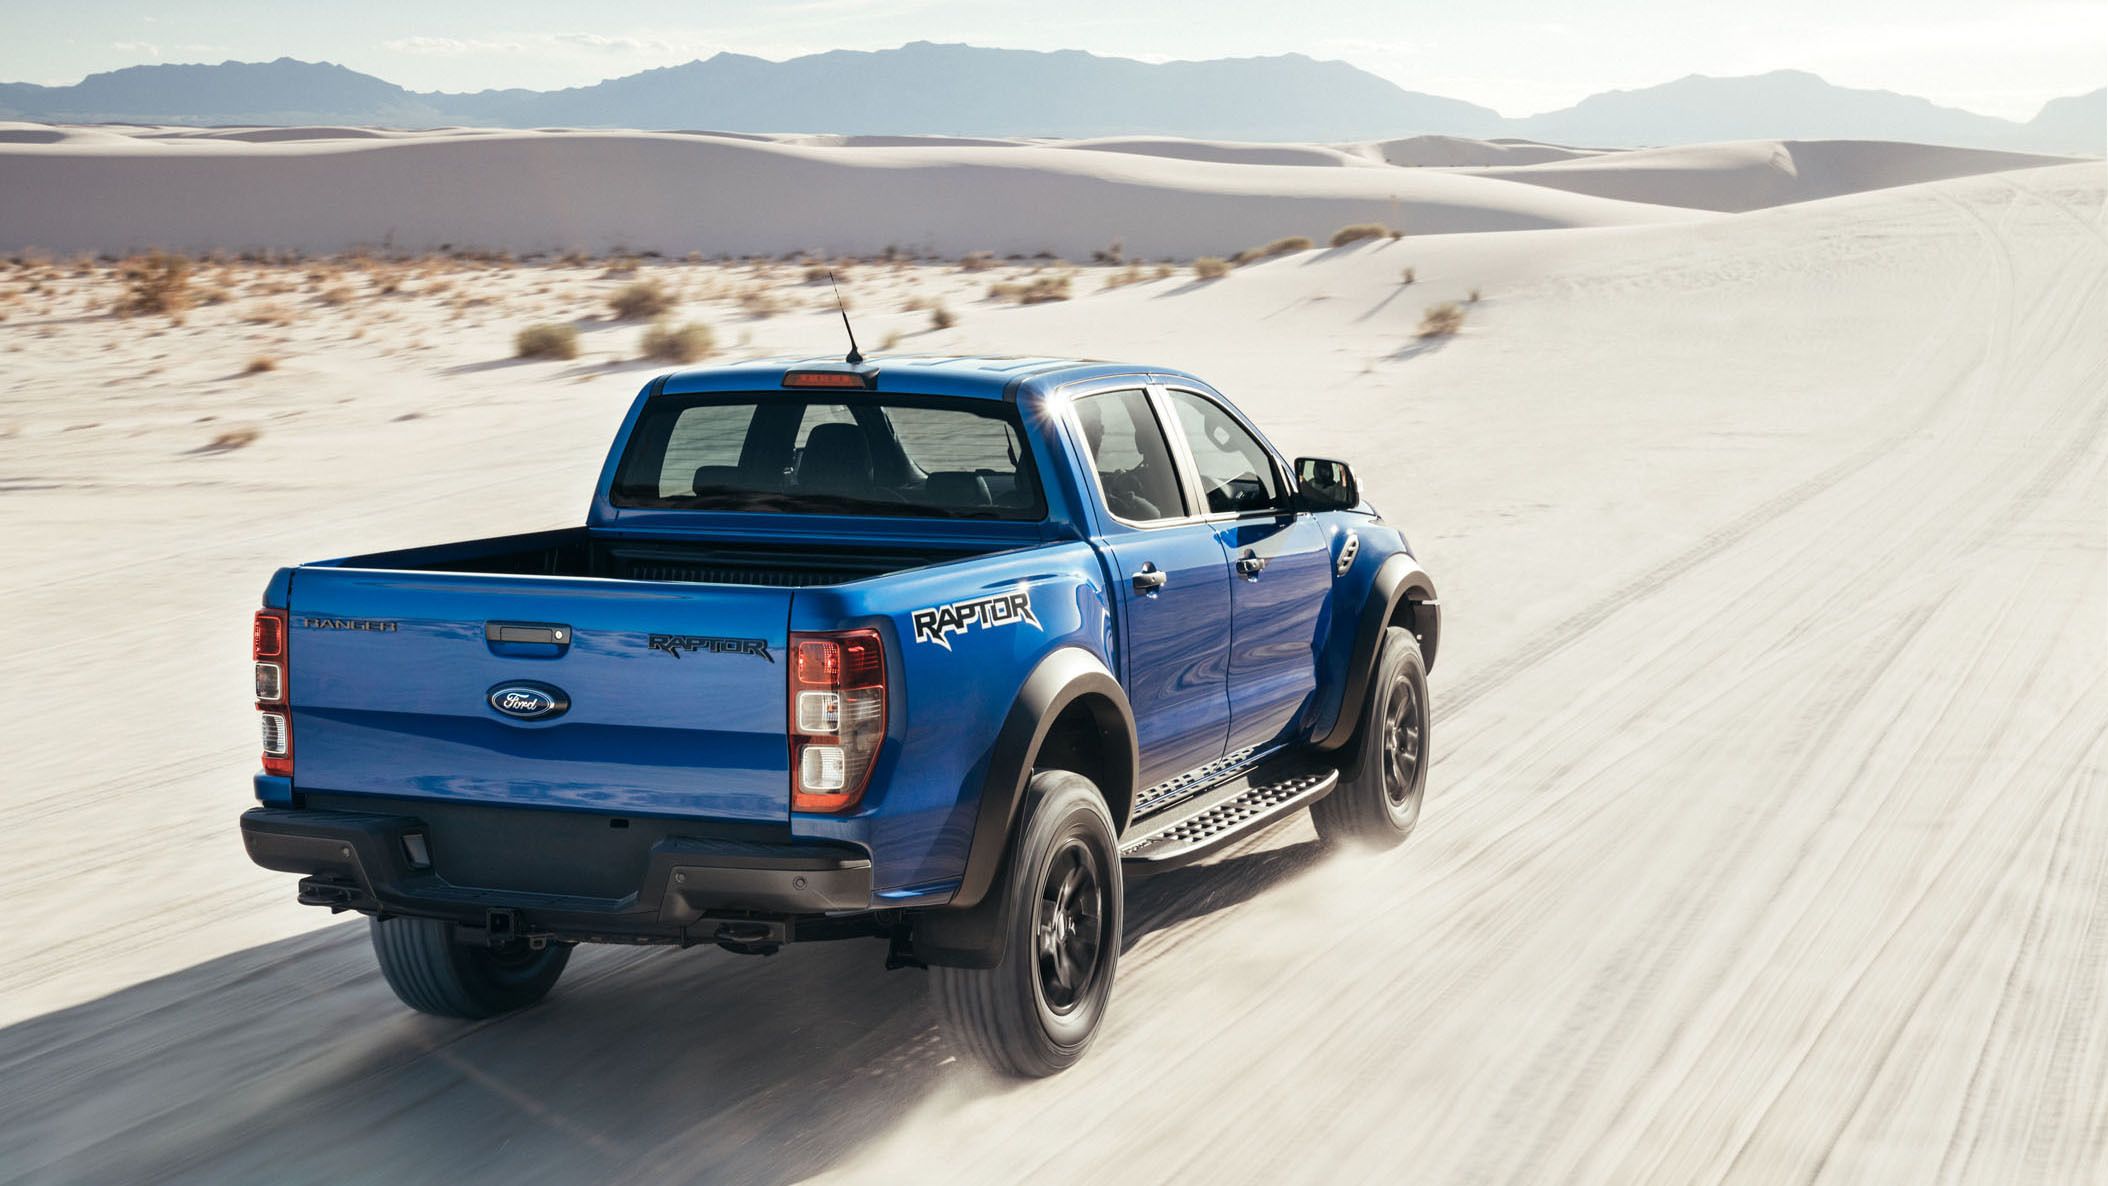 2018 This Is It! Meet the 2019 Ford Ranger Raptor!